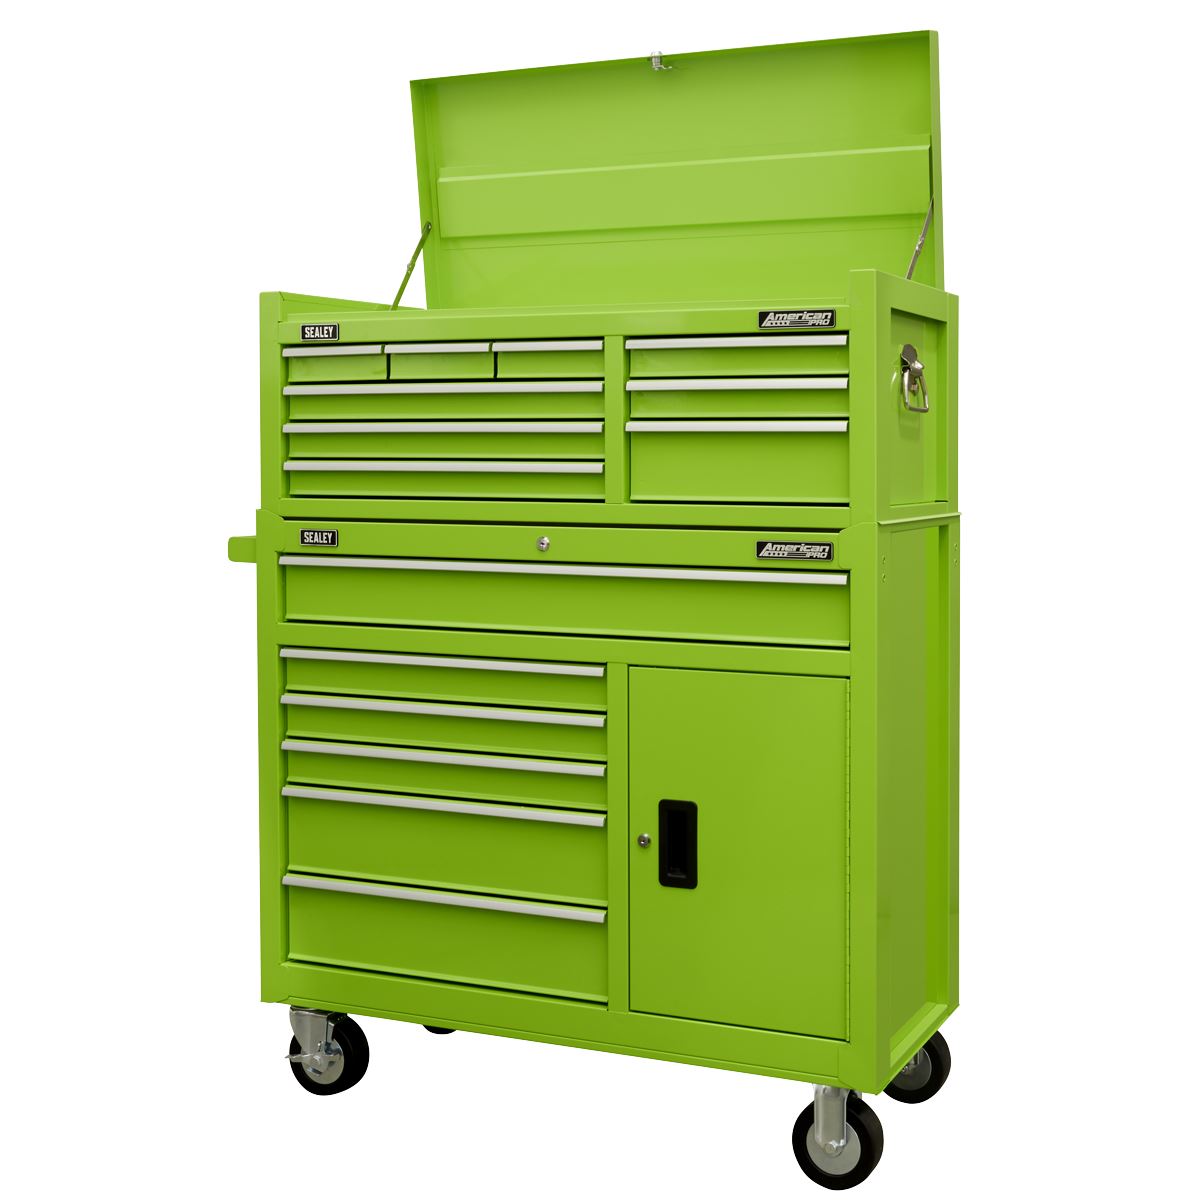 Sealey American Pro Topchest & Rollcab Combination 15 Drawer with Ball-Bearing Slides - Green